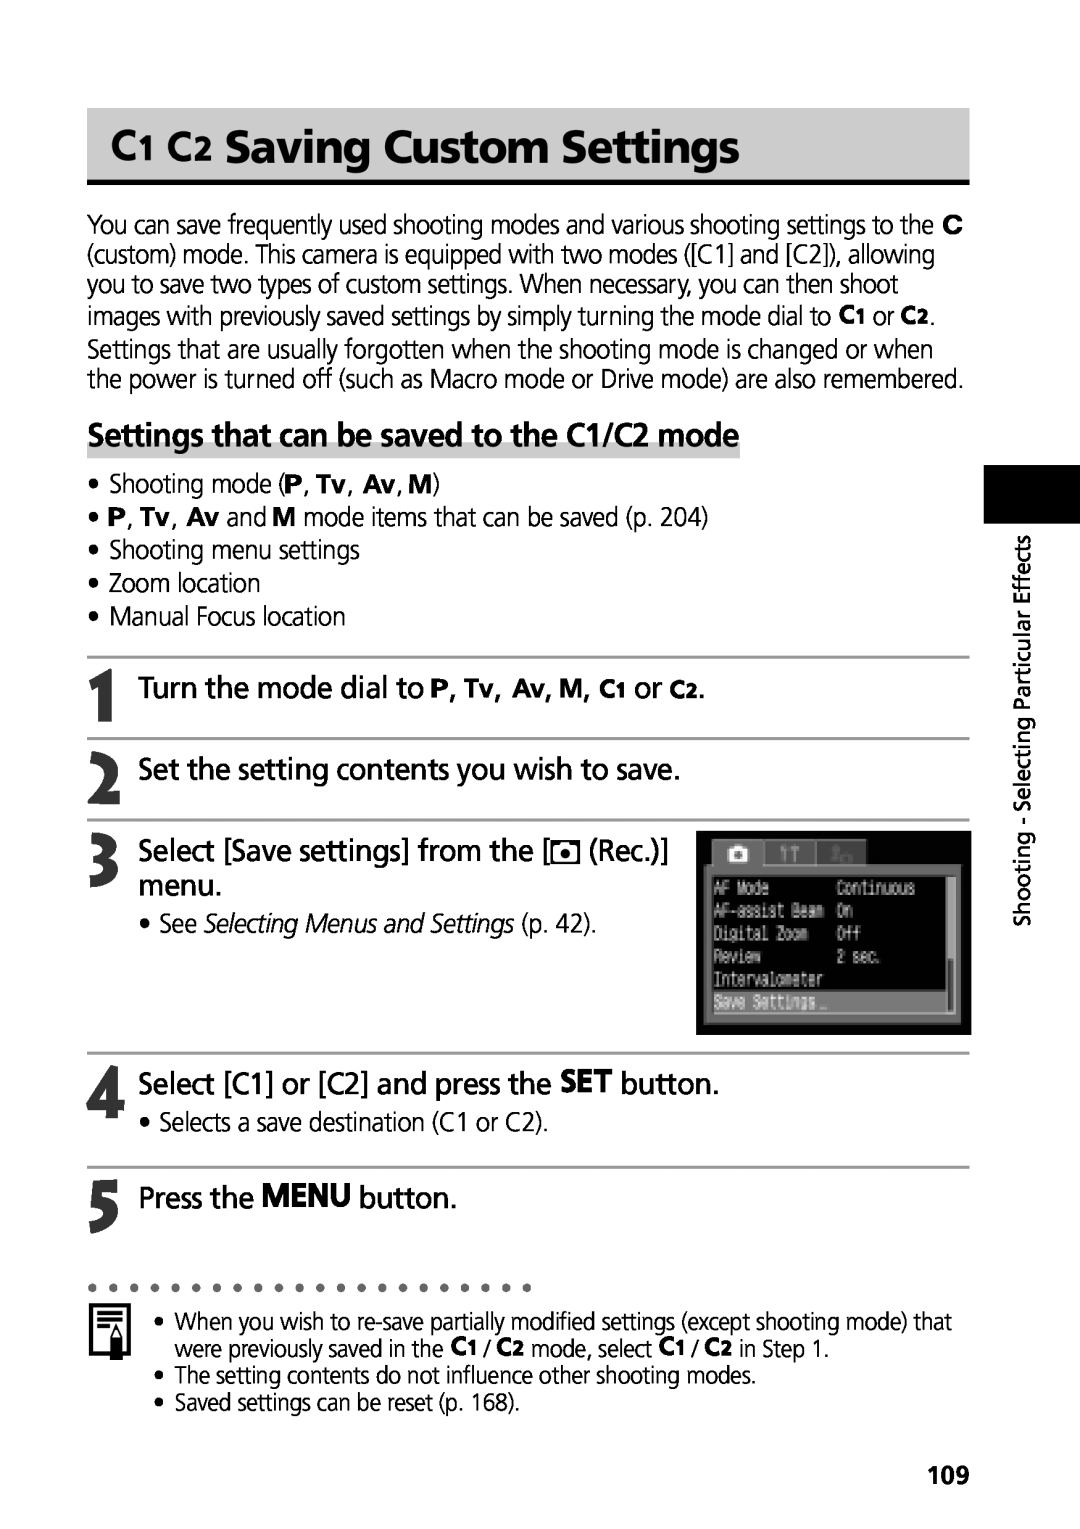 Canon G3 manual Saving Custom Settings, Settings that can be saved to the C1/C2 mode, Turn the mode dial to , , , , or 